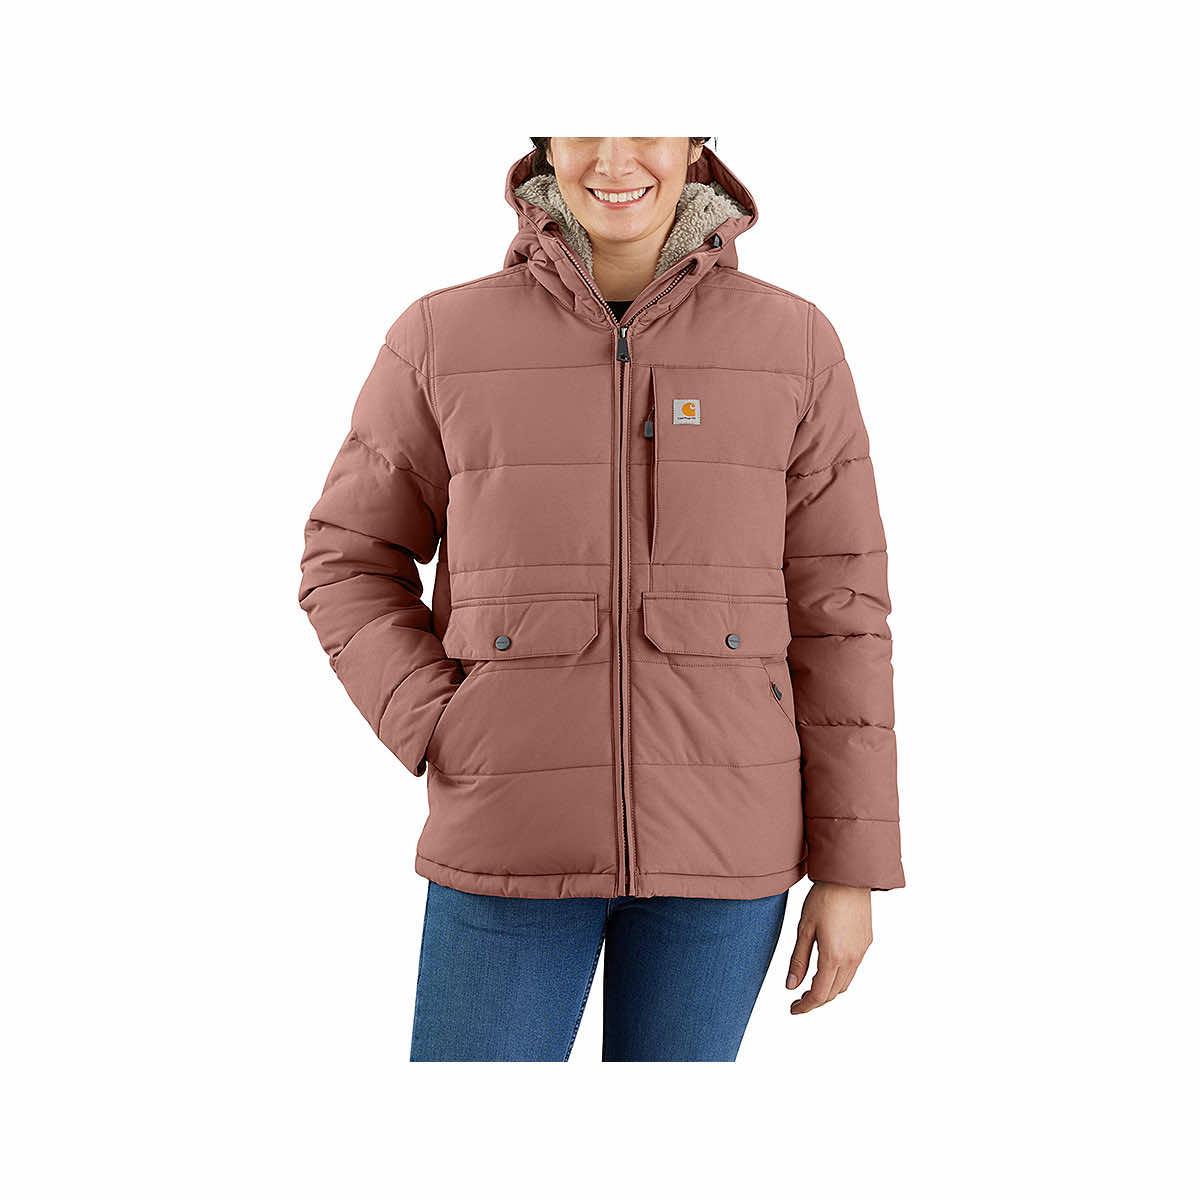 Stay warm and stylish with the Women's Patagonia Back Pasture Jacket